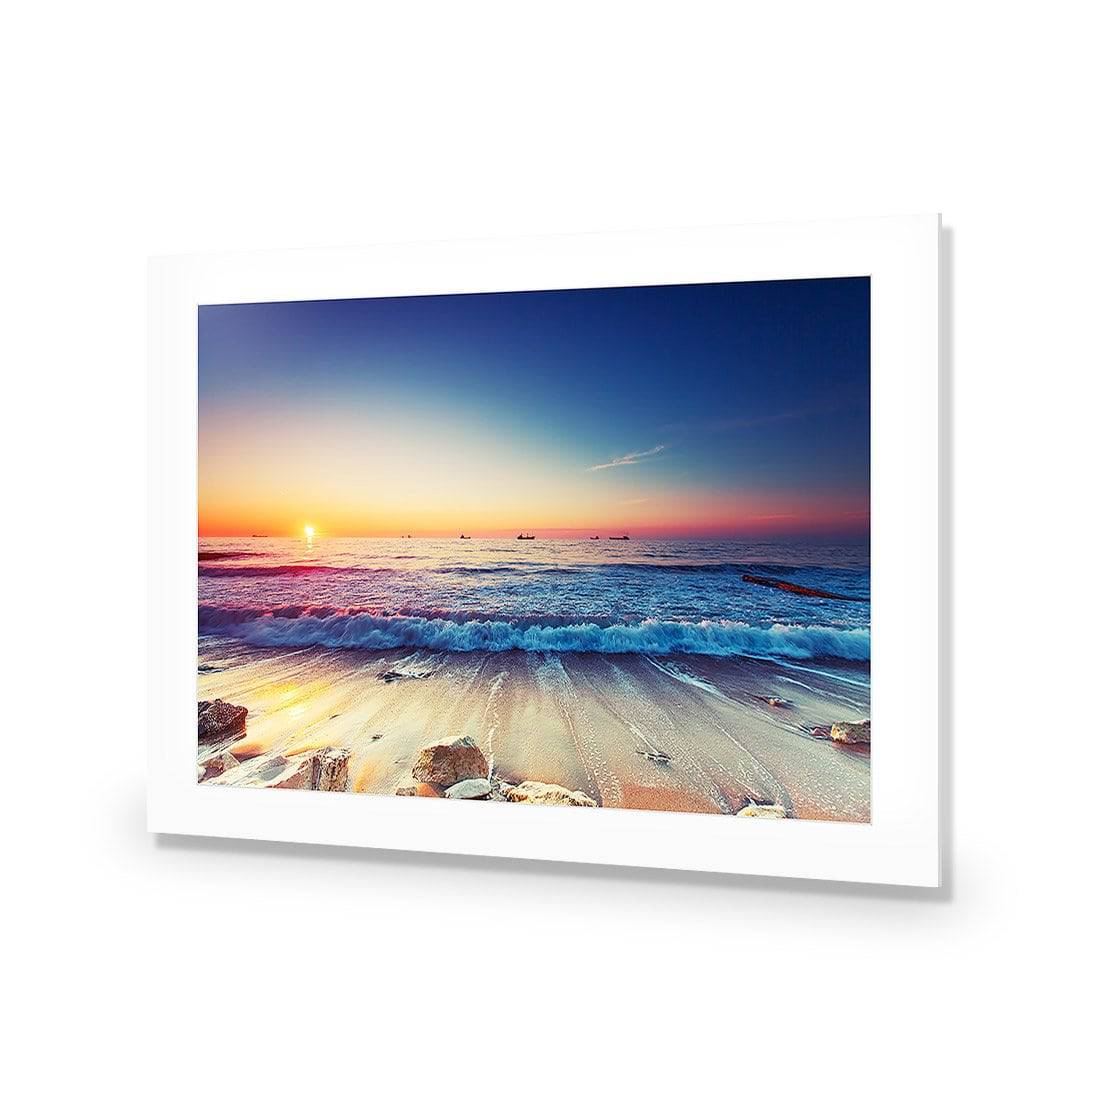 High Tide Sunset-Acrylic-Wall Art Design-With Border-Acrylic - No Frame-45x30cm-Wall Art Designs